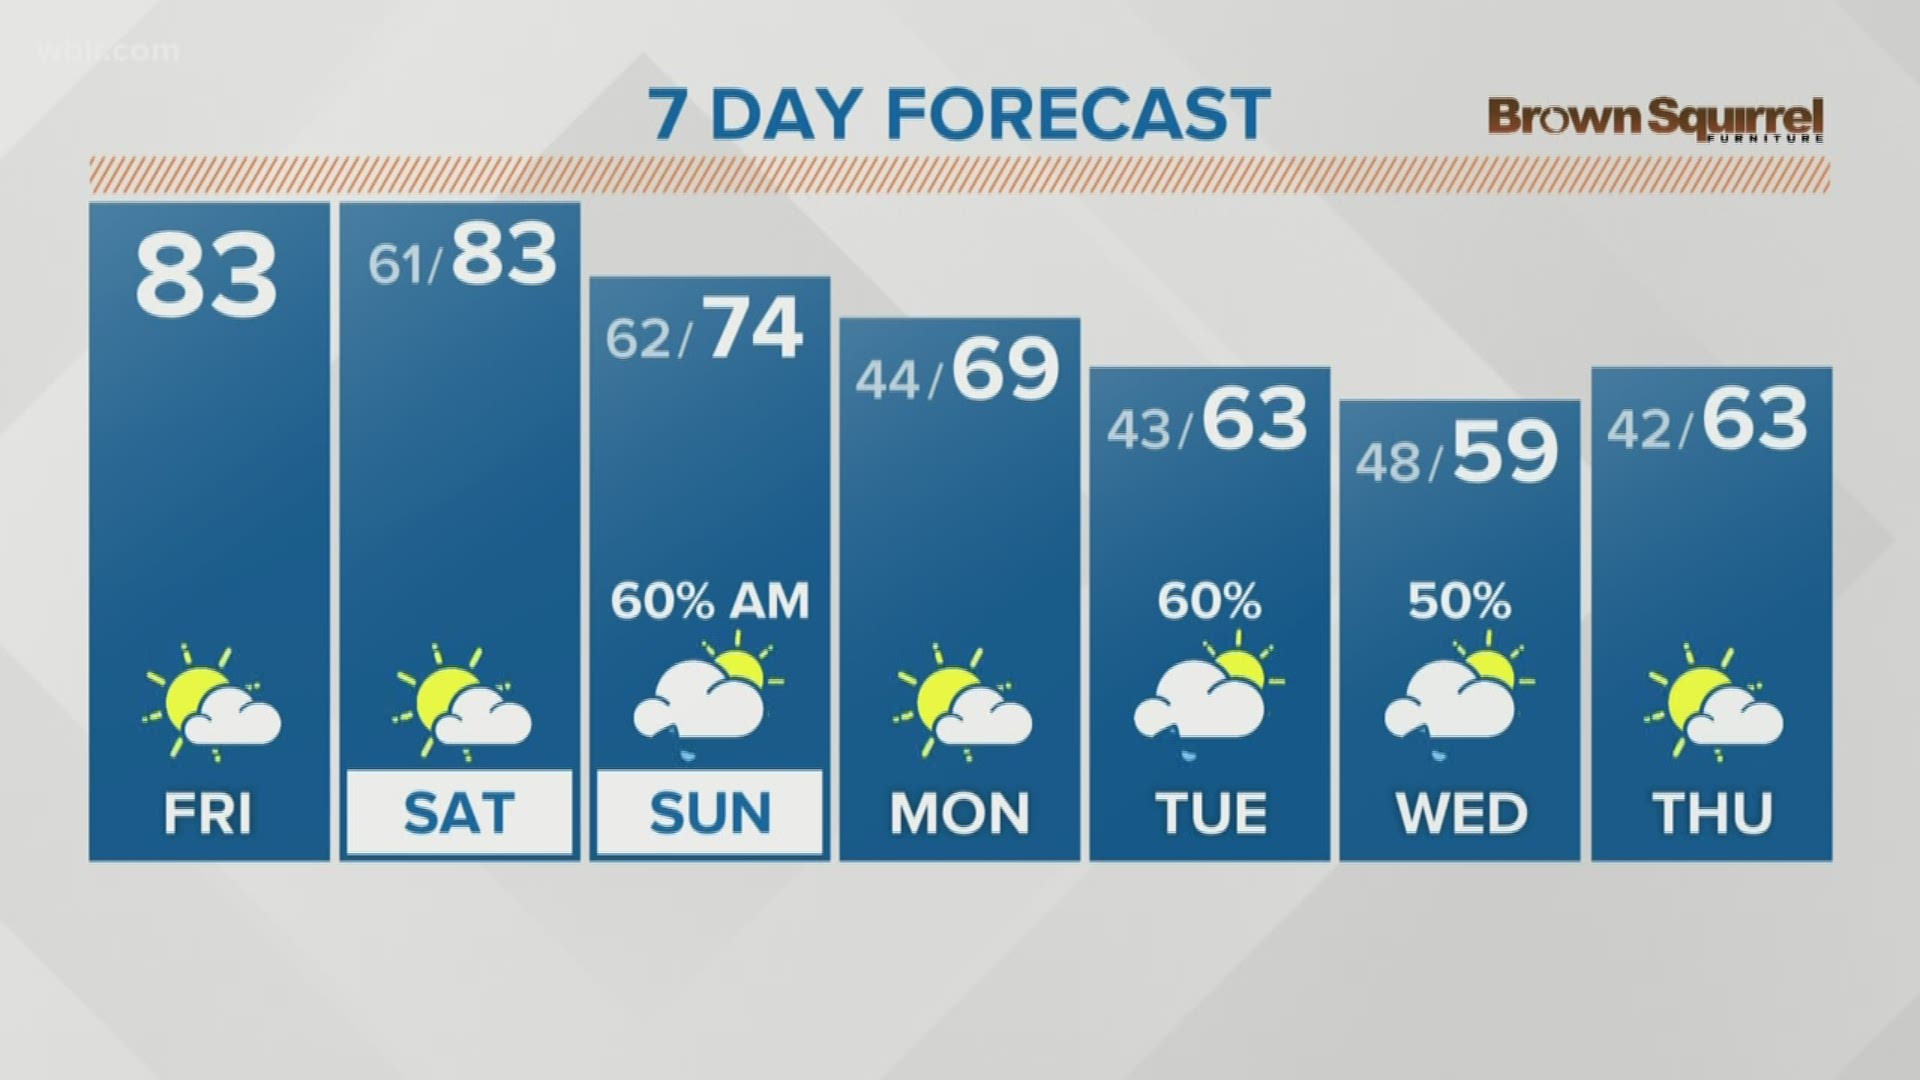 Warm and dry through Saturday, then scattered showers slide in early Sunday morning